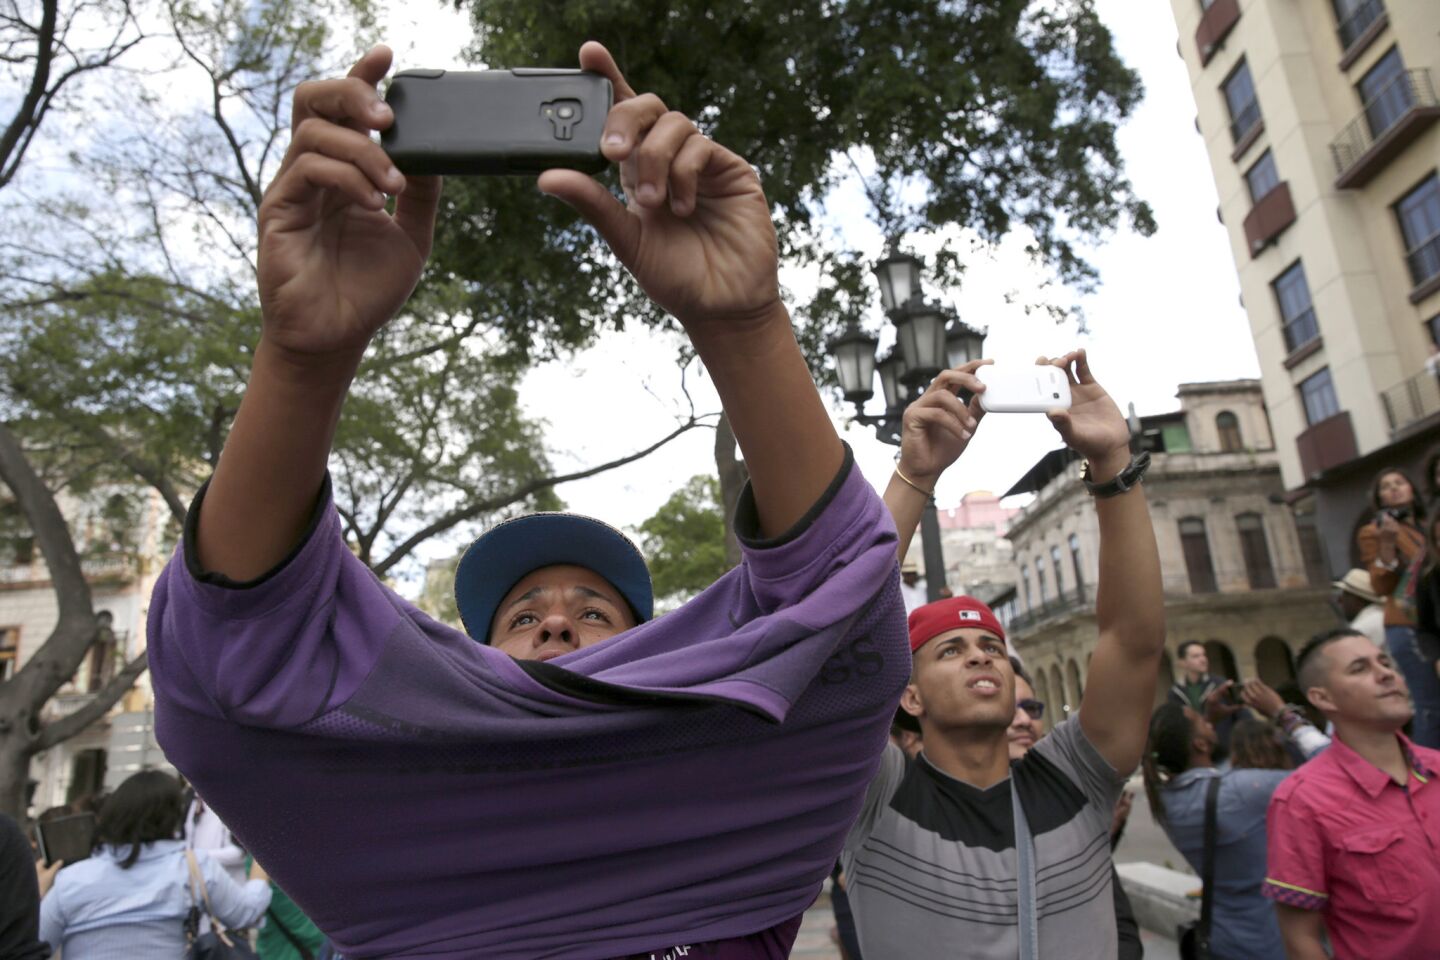 Onlookers crane to shoot smartphone images of President Obama, who is stationed more than a block away at the El Gran Teatro de Havana in Central Havana.